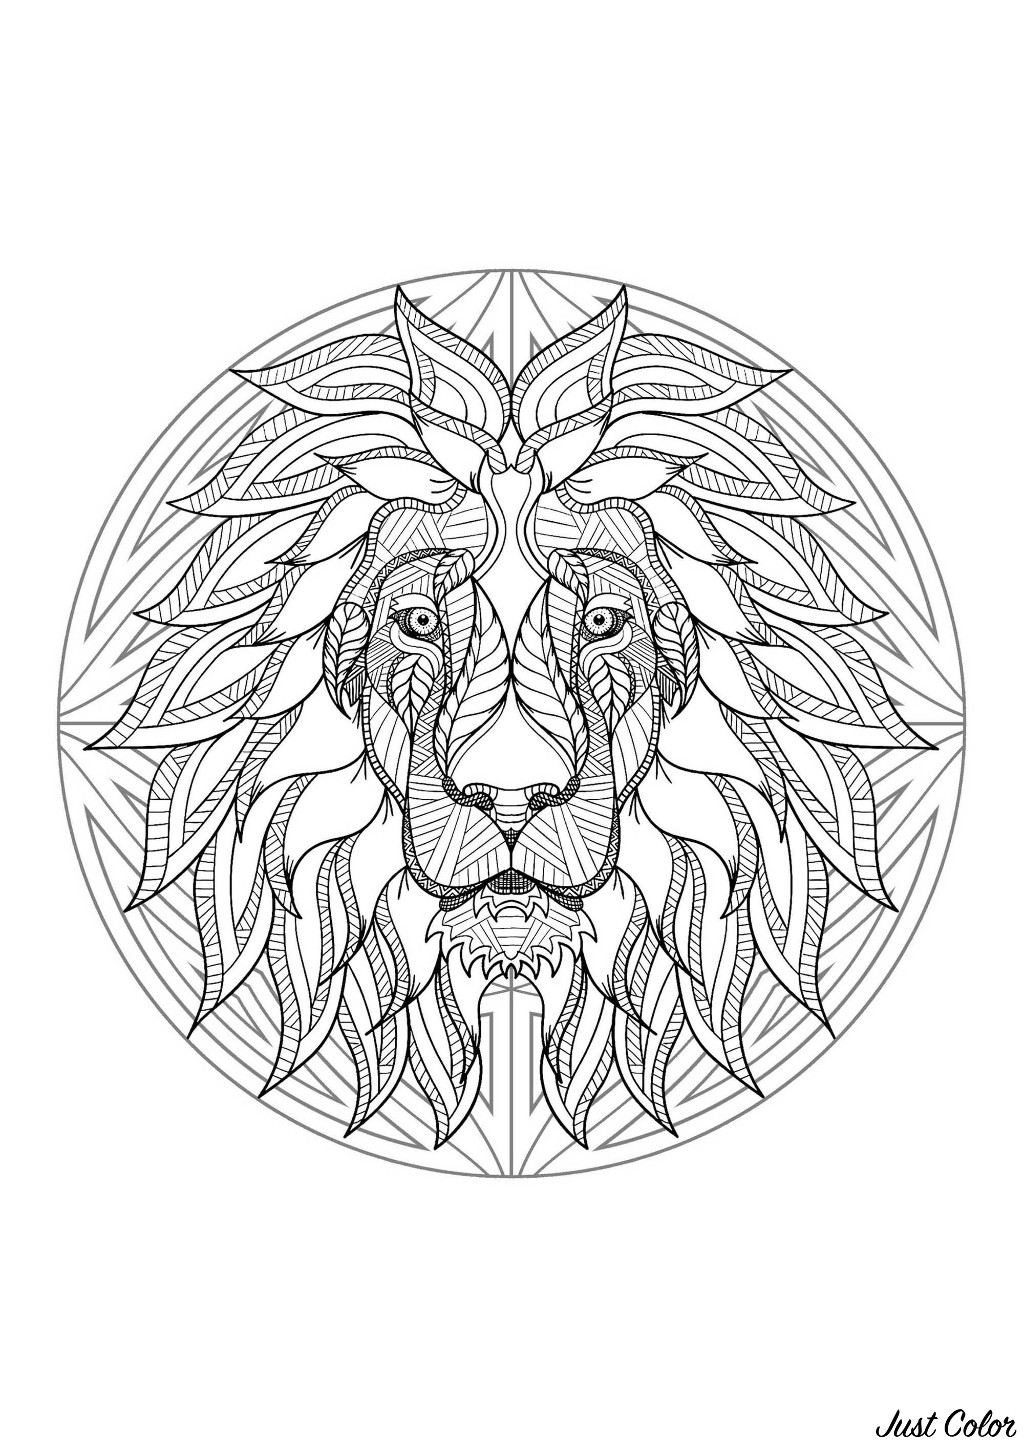 Complex Mandala coloring page with majestic Lion head - 4 - Difficult  Mandalas (for adults)